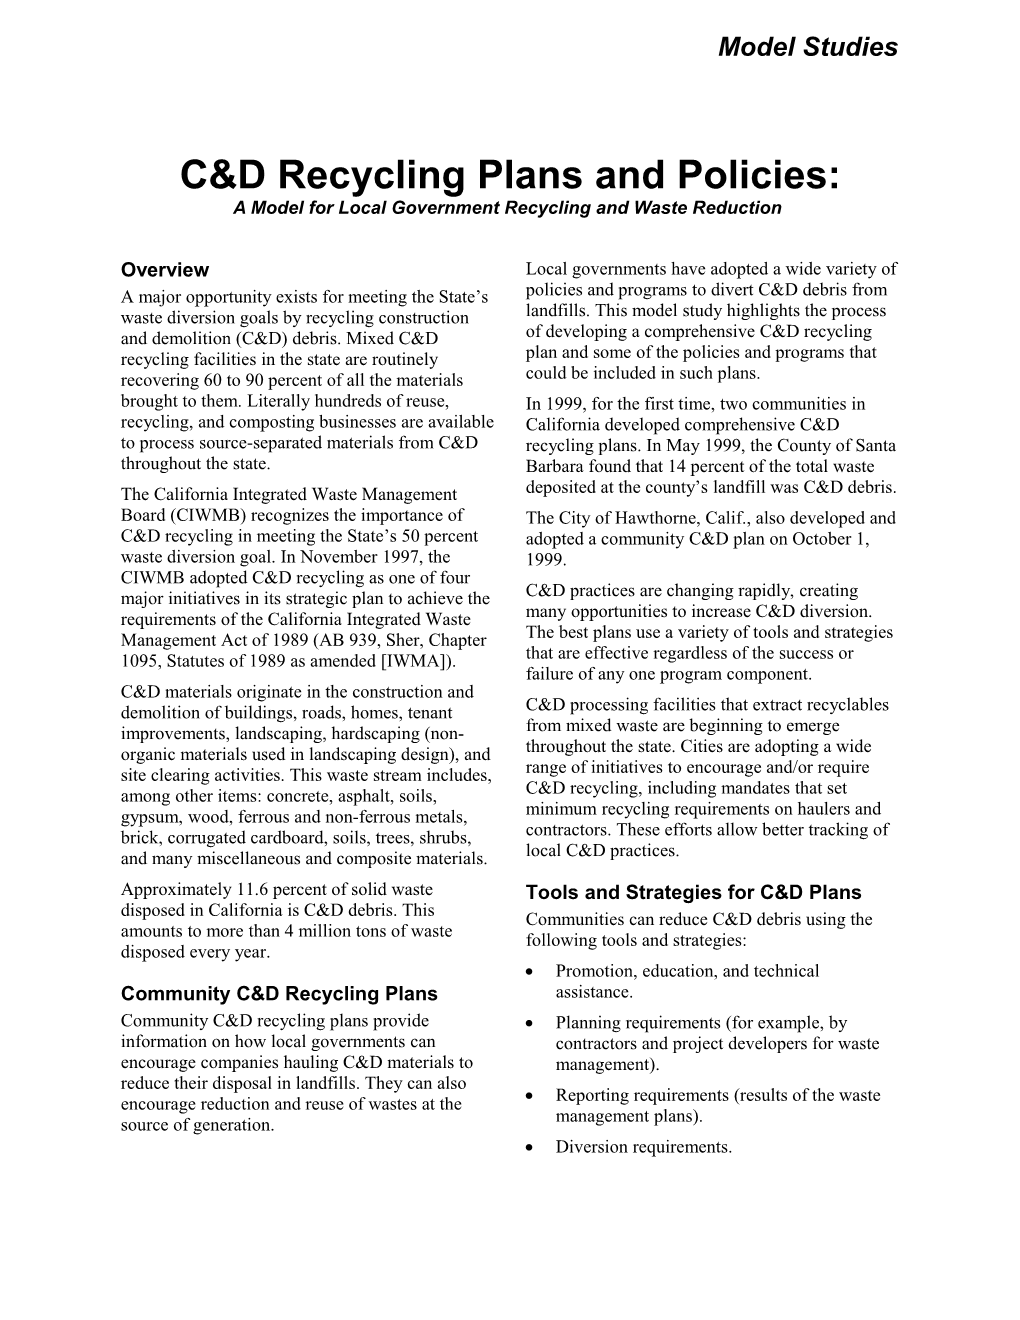 C&D Recycling Plans And Policies: A Model For Local Government Recycling And Waste Reduction